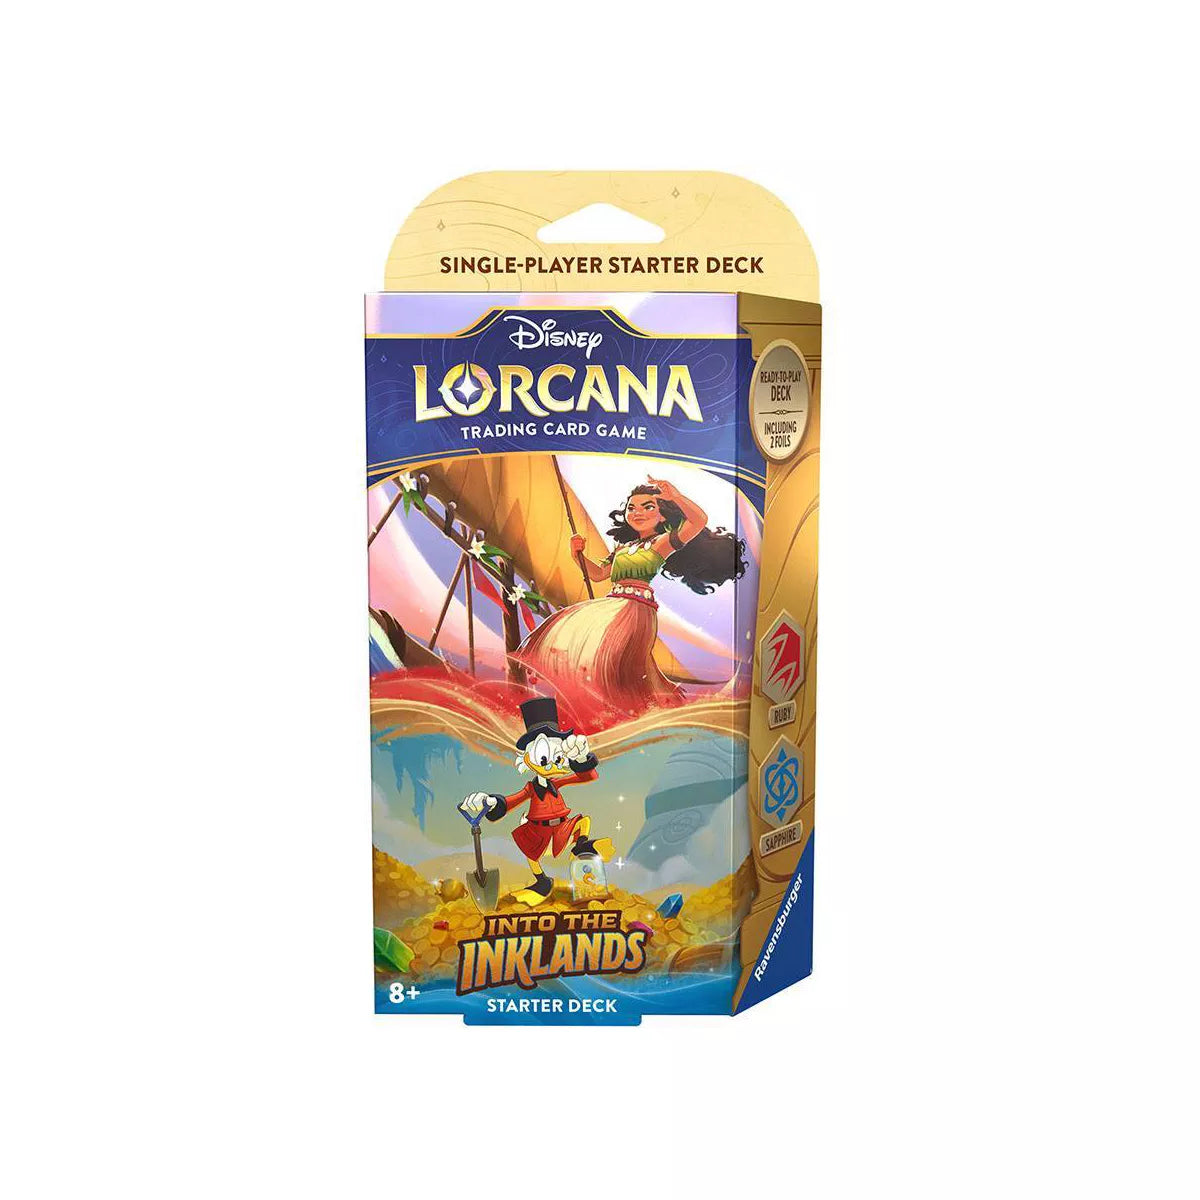 Disney Lorcana Trading Card Game: Into the Inklands Starter Deck - Ruby & Sapphire